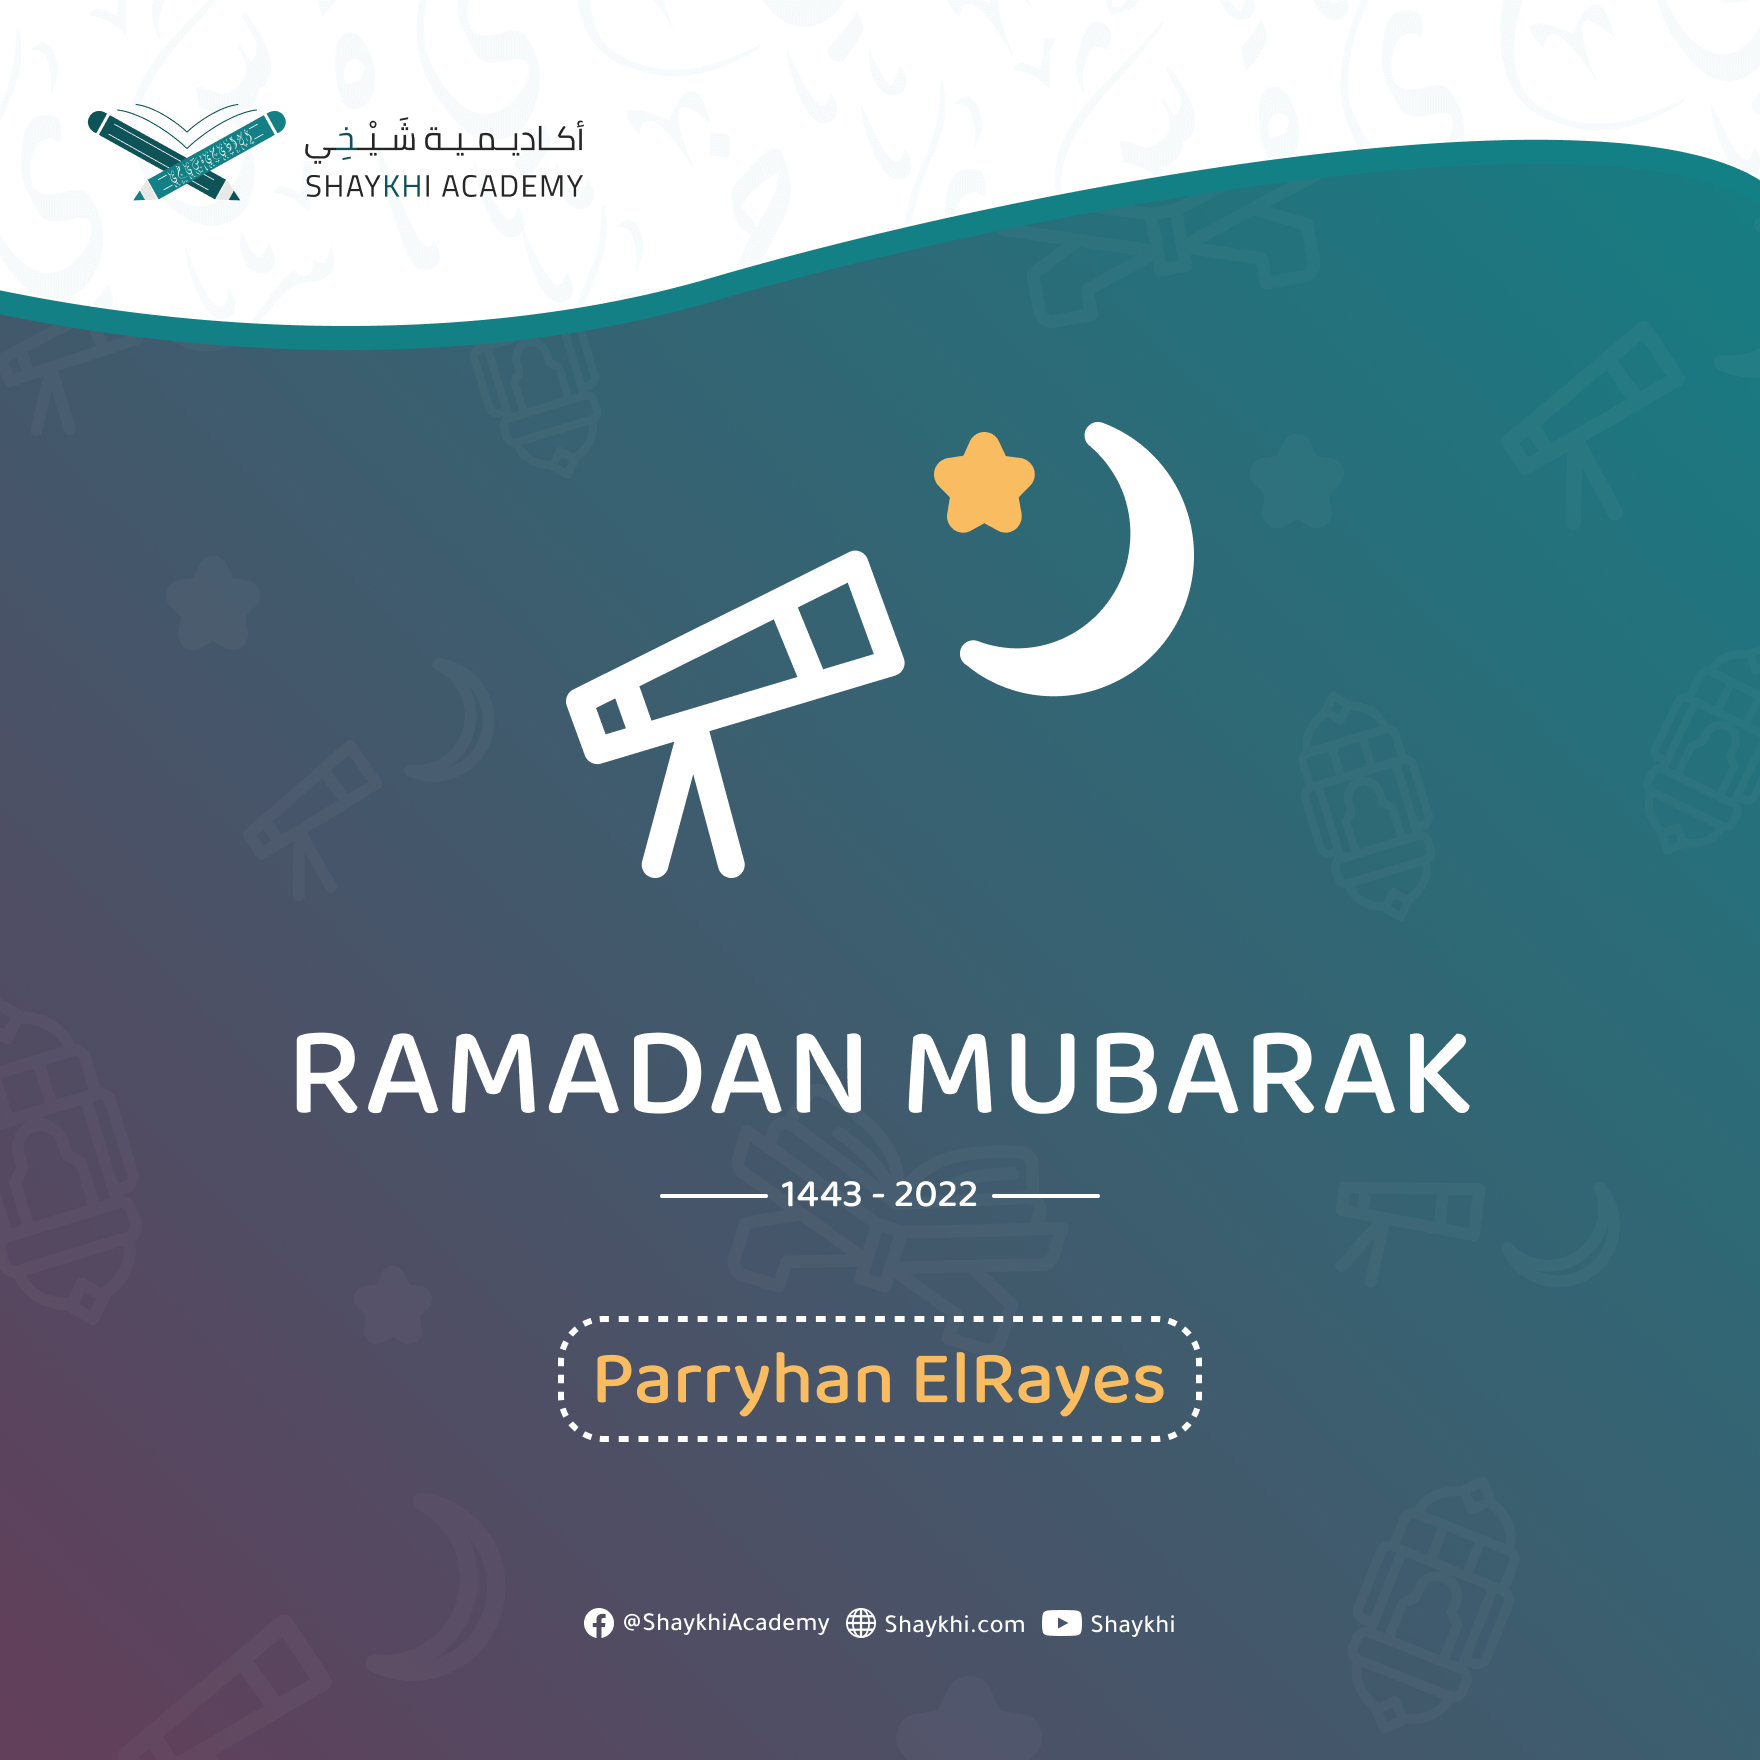 Ramadan Mubarak Images and Meaning - cards for Quran Students 15 Kids and teenagers